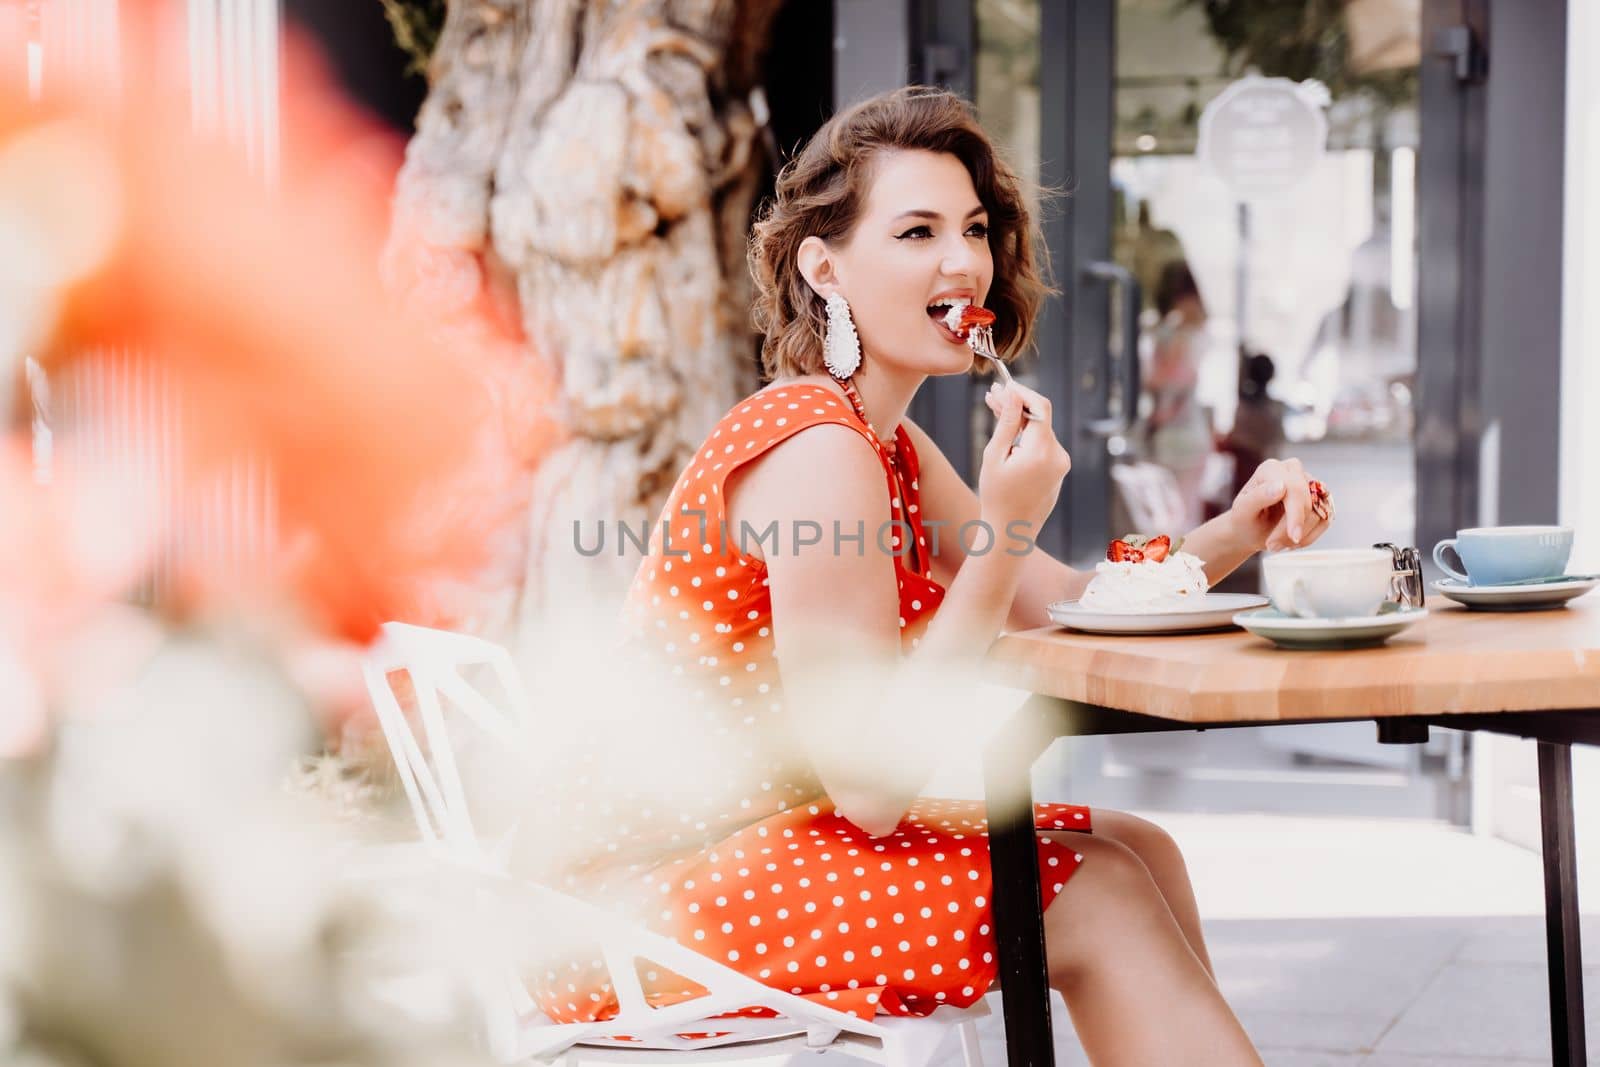 Charming woman in a restaurant, cafe on the street. She sits at the table and eats a cake with a fork. Dressed in a red sundress with white polka dots. by Matiunina